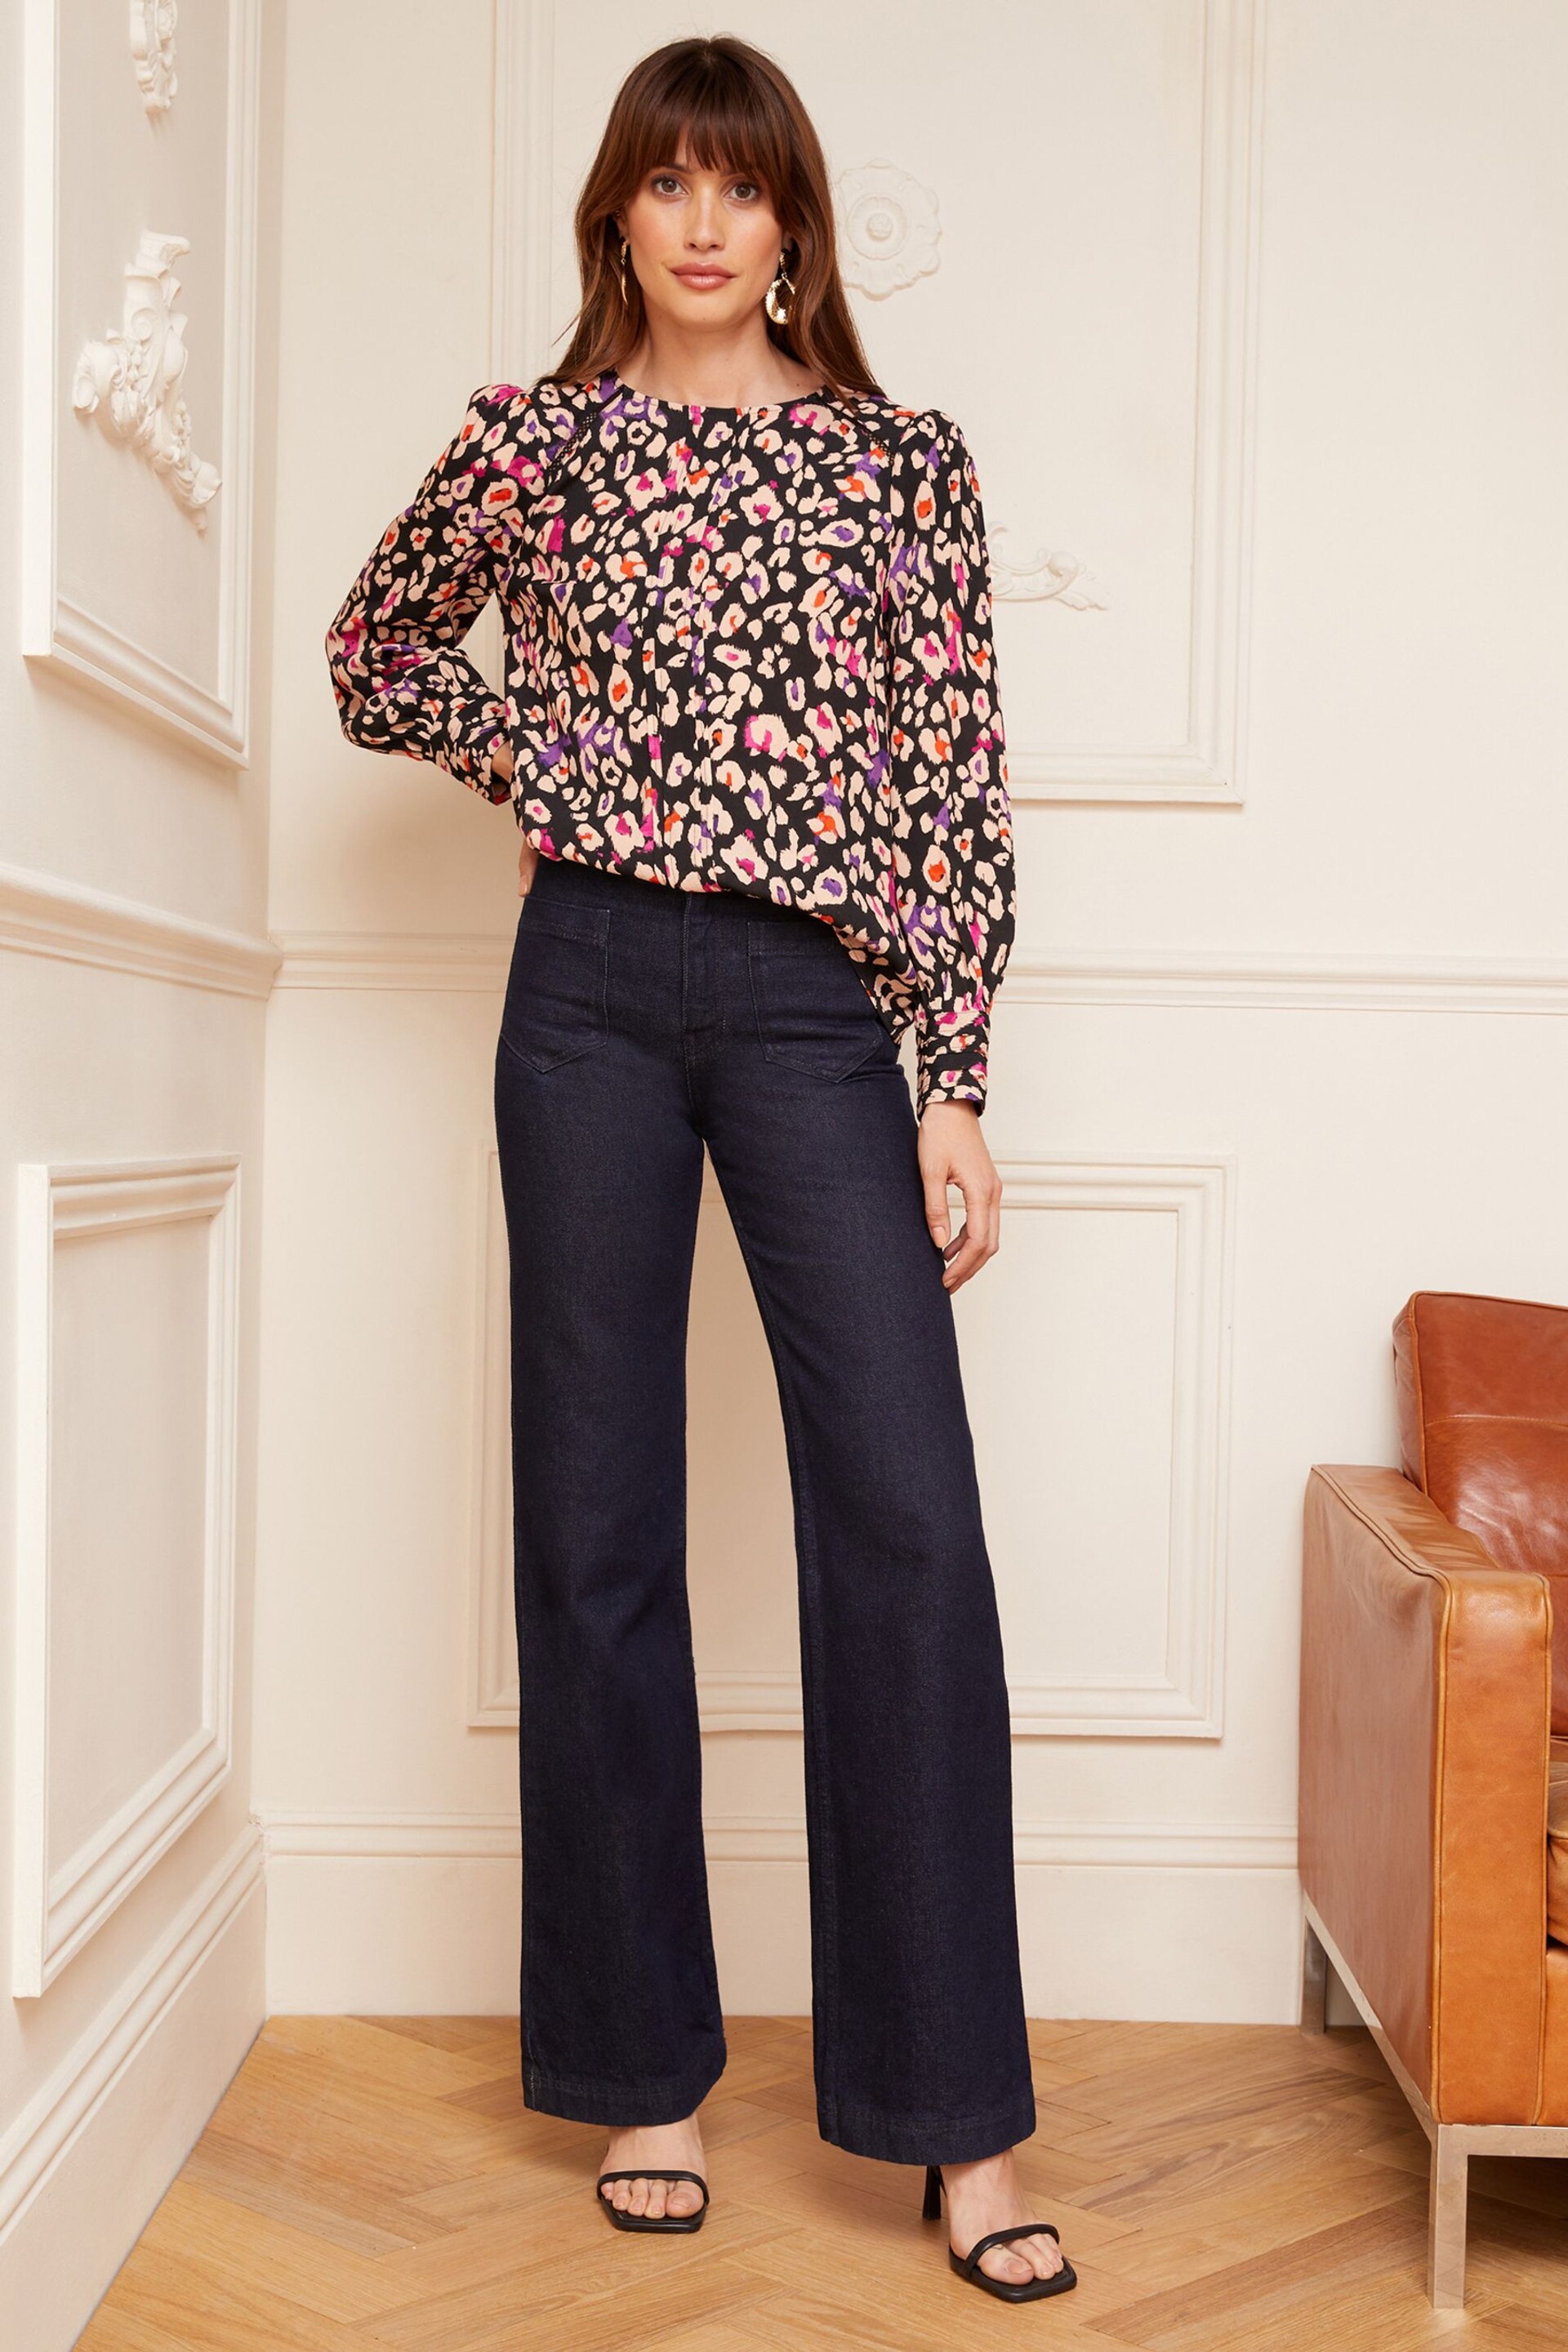 Love & Roses Black Animal Long Sleeve Blouse With Central Pintuck Details - Image 3 of 4